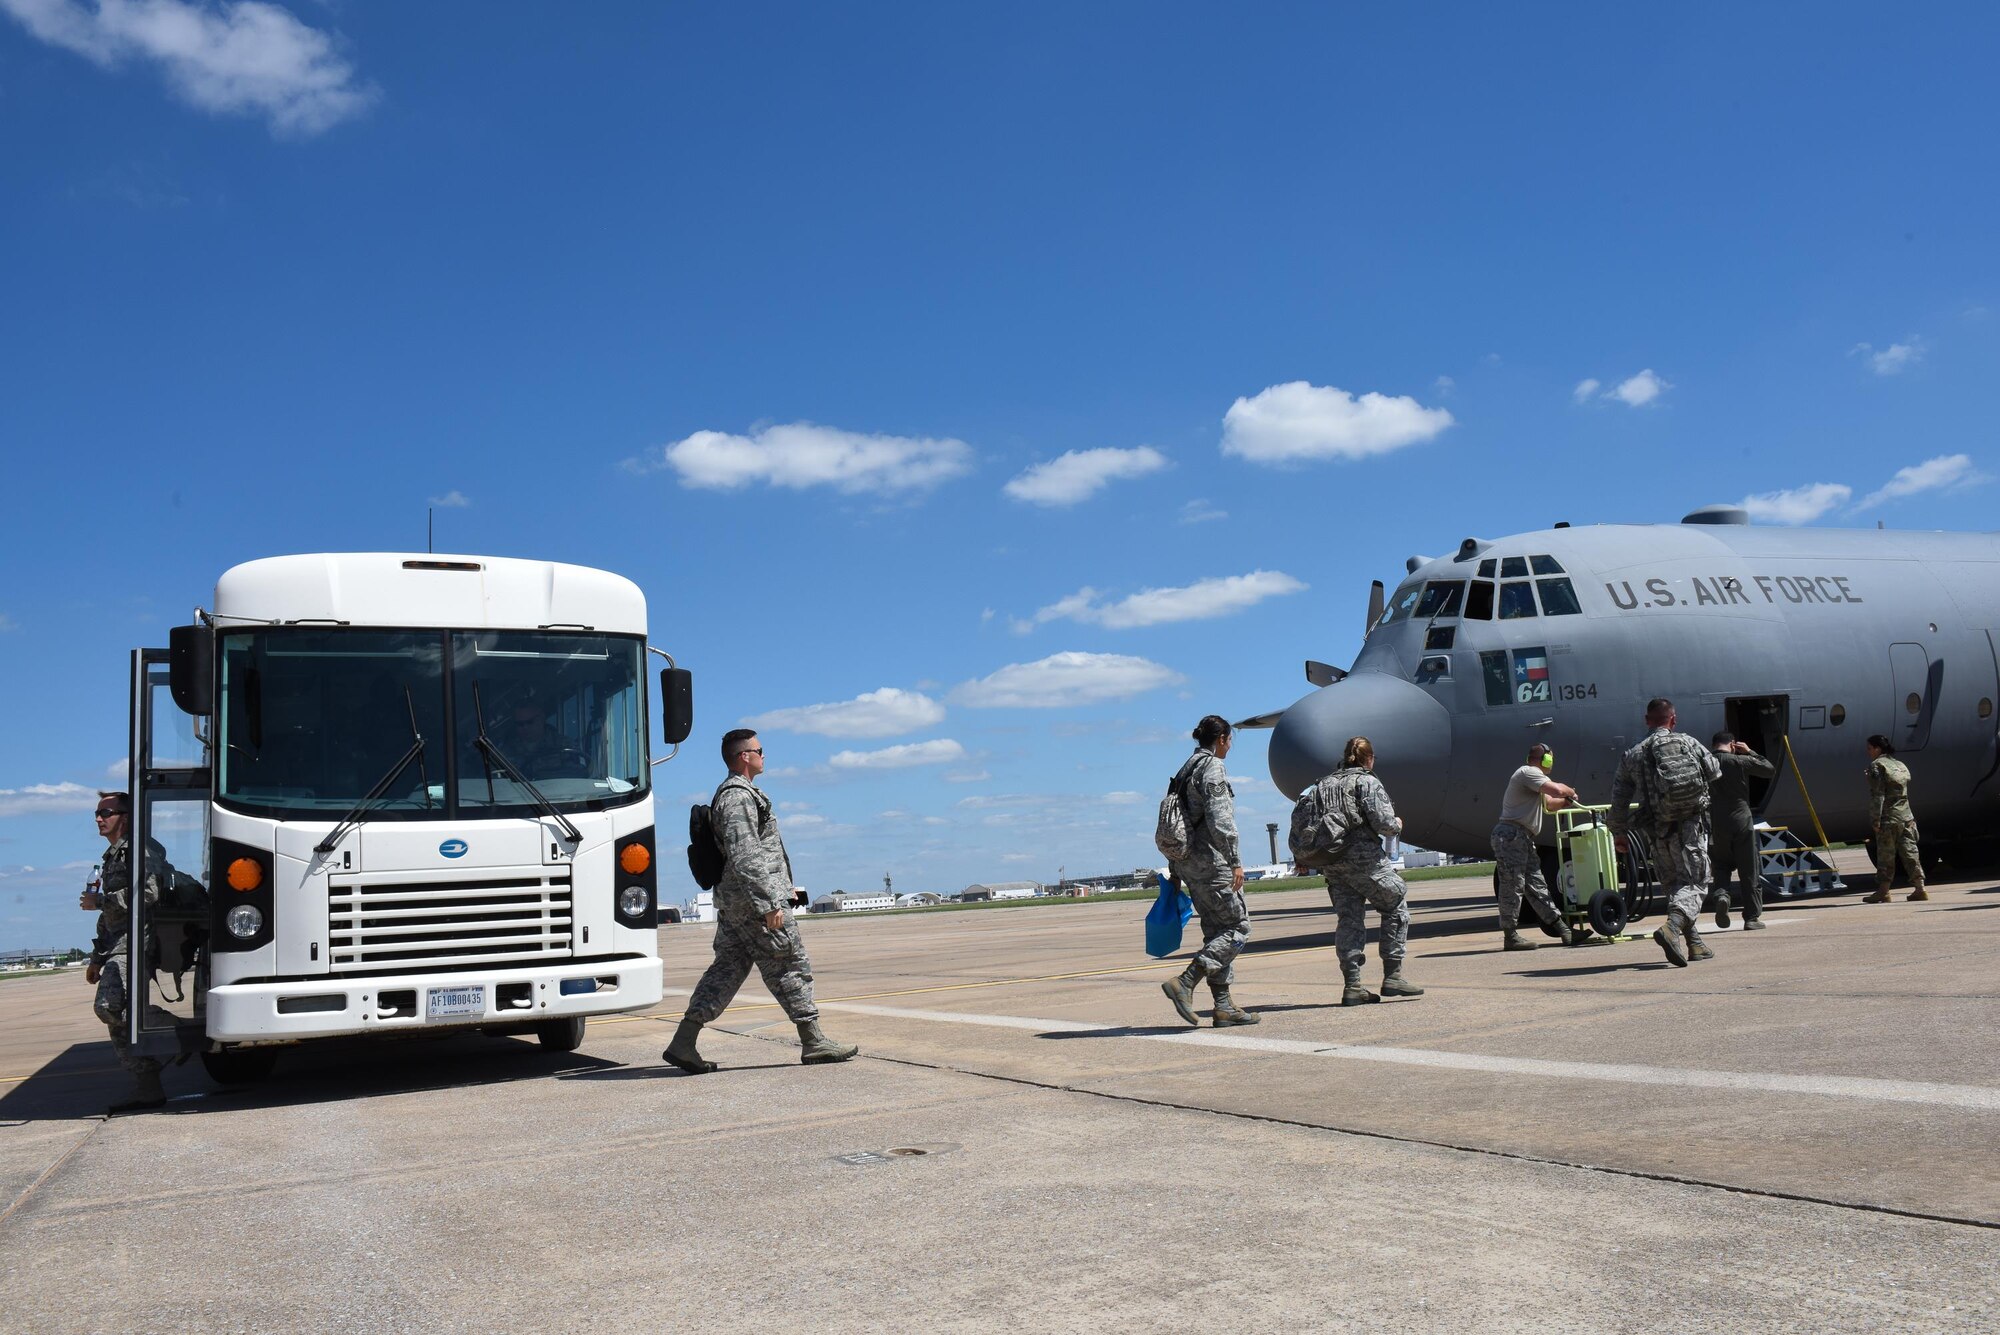 Airmen from the 137th Special Operations Medical Group, Will Rogers Air National Guard Base, Oklahoma City, exit a bus and board a C-130 Hercules from the 136th Airlift Wing, Naval Air Station Fort Worth Joint Reserve Base at Carswell Field, Texas, Aug. 29, 2017, at Will Rogers Air National Guard Base. The Airmen are part of the 137th Special Operation Wing’s deployment of nearly 40 medical and aeromedical evacuation Airmen and equipment in support of the Texas Military Department and their relief efforts following Hurricane Harvey. (U.S. Air National Guard photo by Staff Sgt. Kasey Phipps/Released)